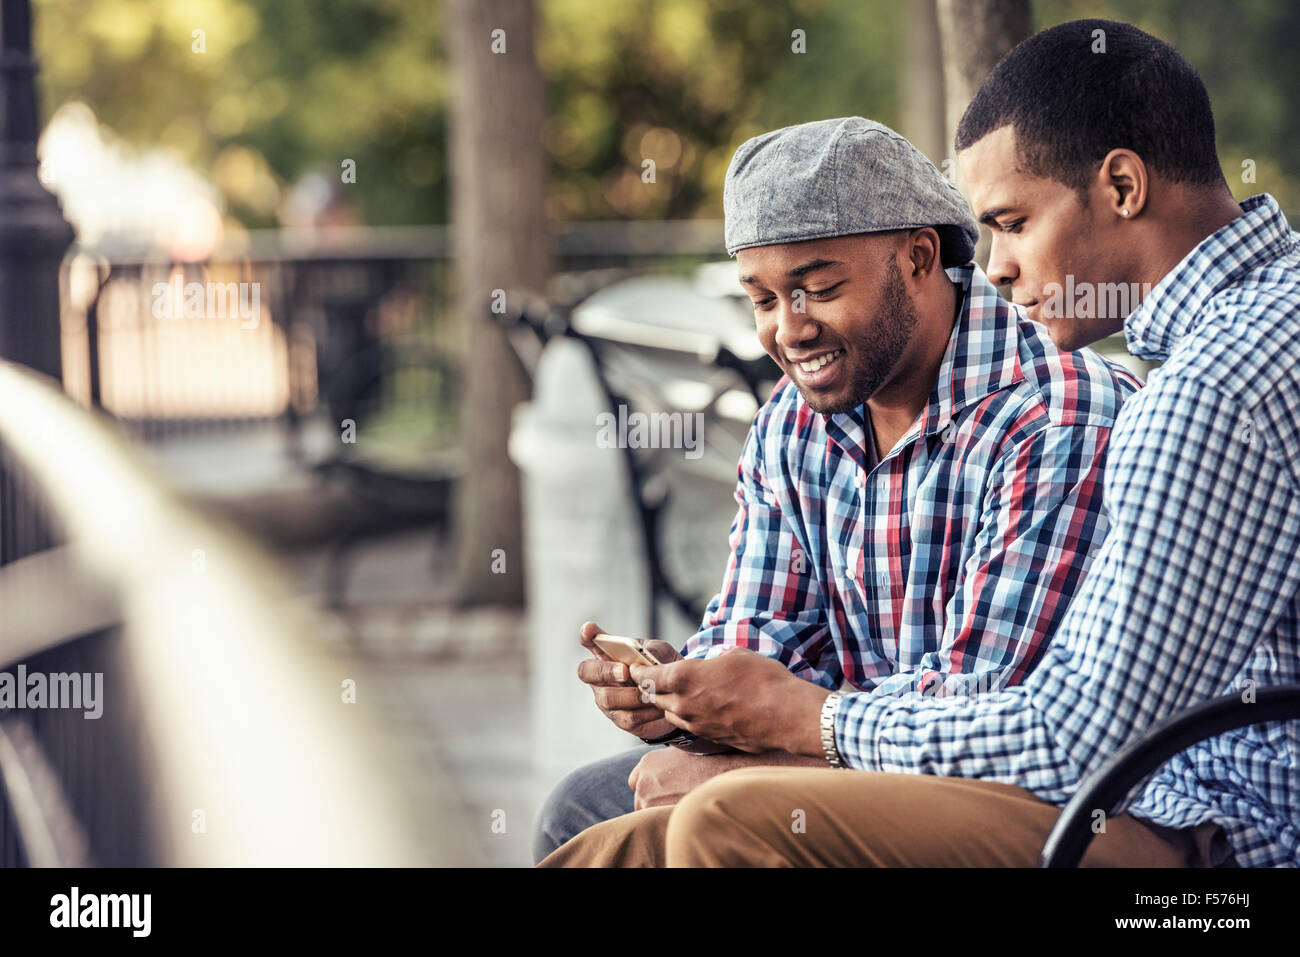 Two men sitting in a park, looking at a smart phone Stock Photo